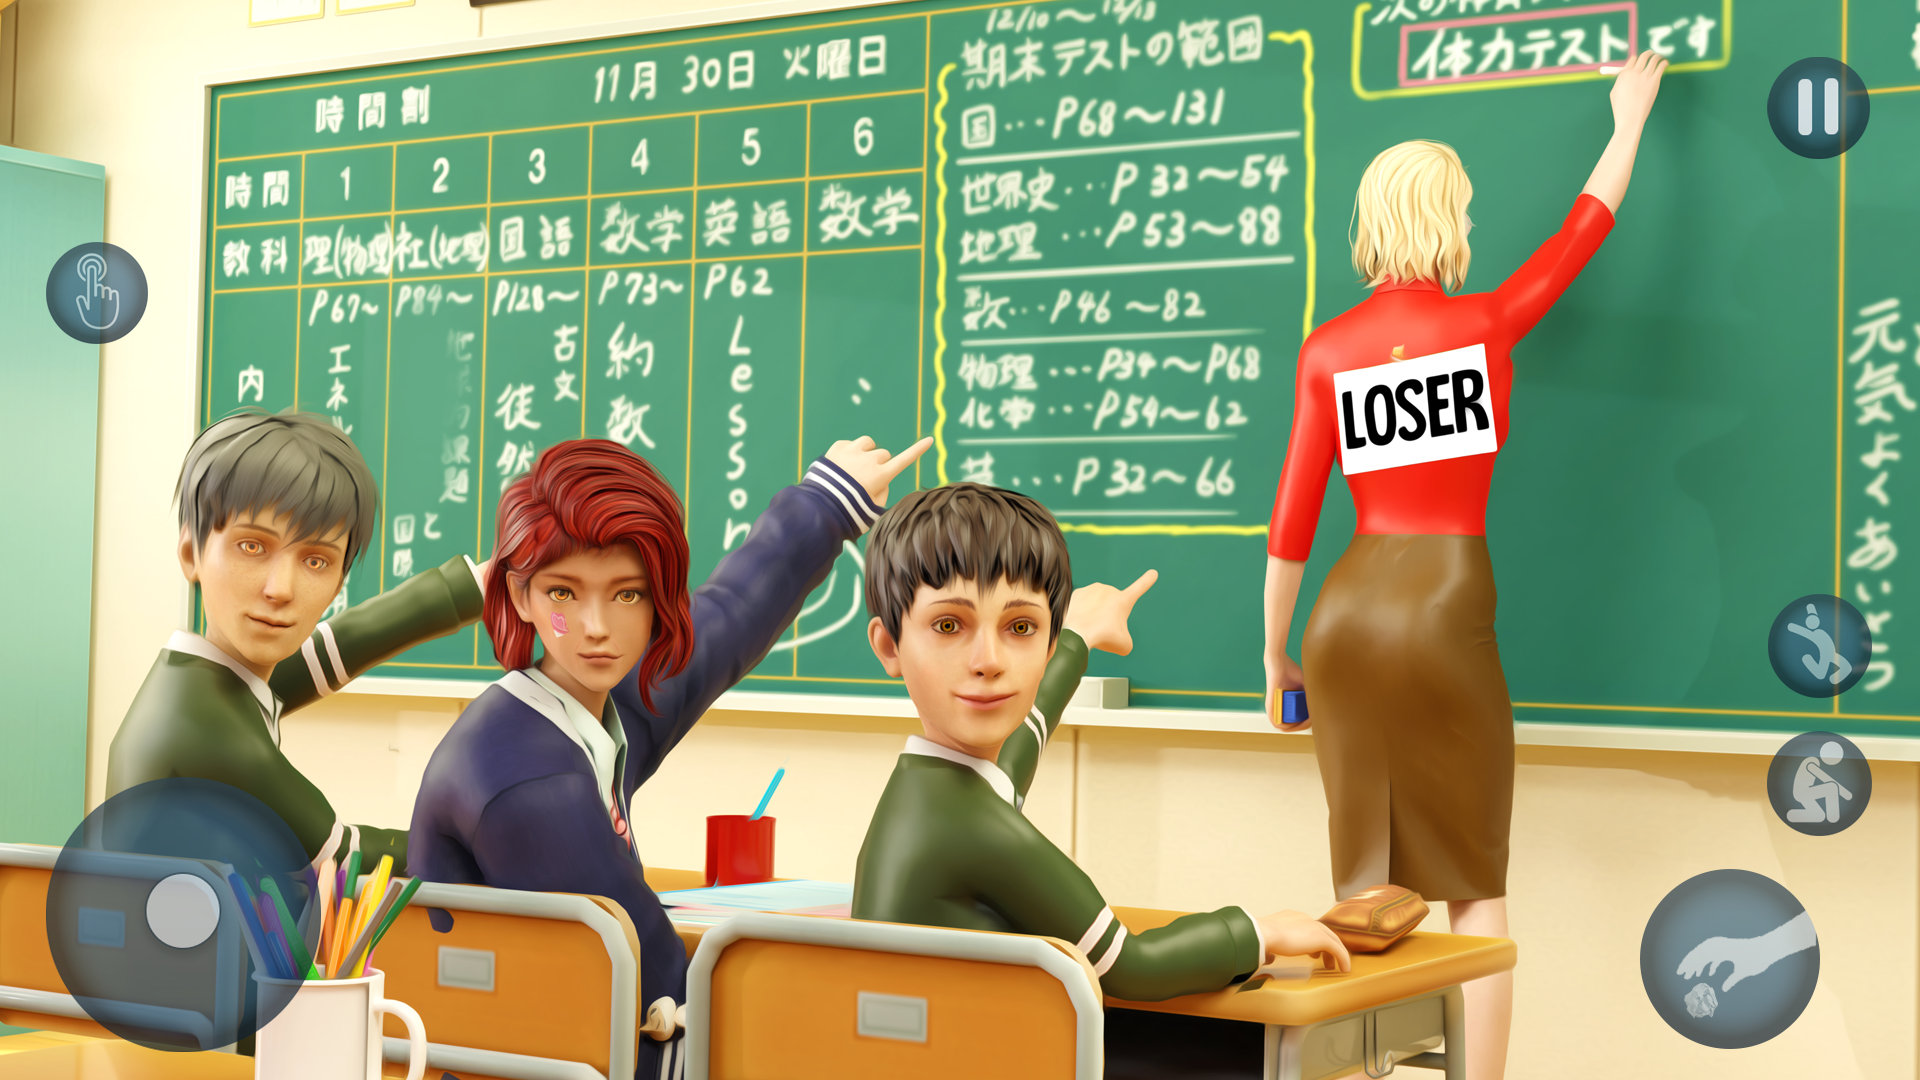 Scare Scary Bad Teacher Life for Android - Free App Download